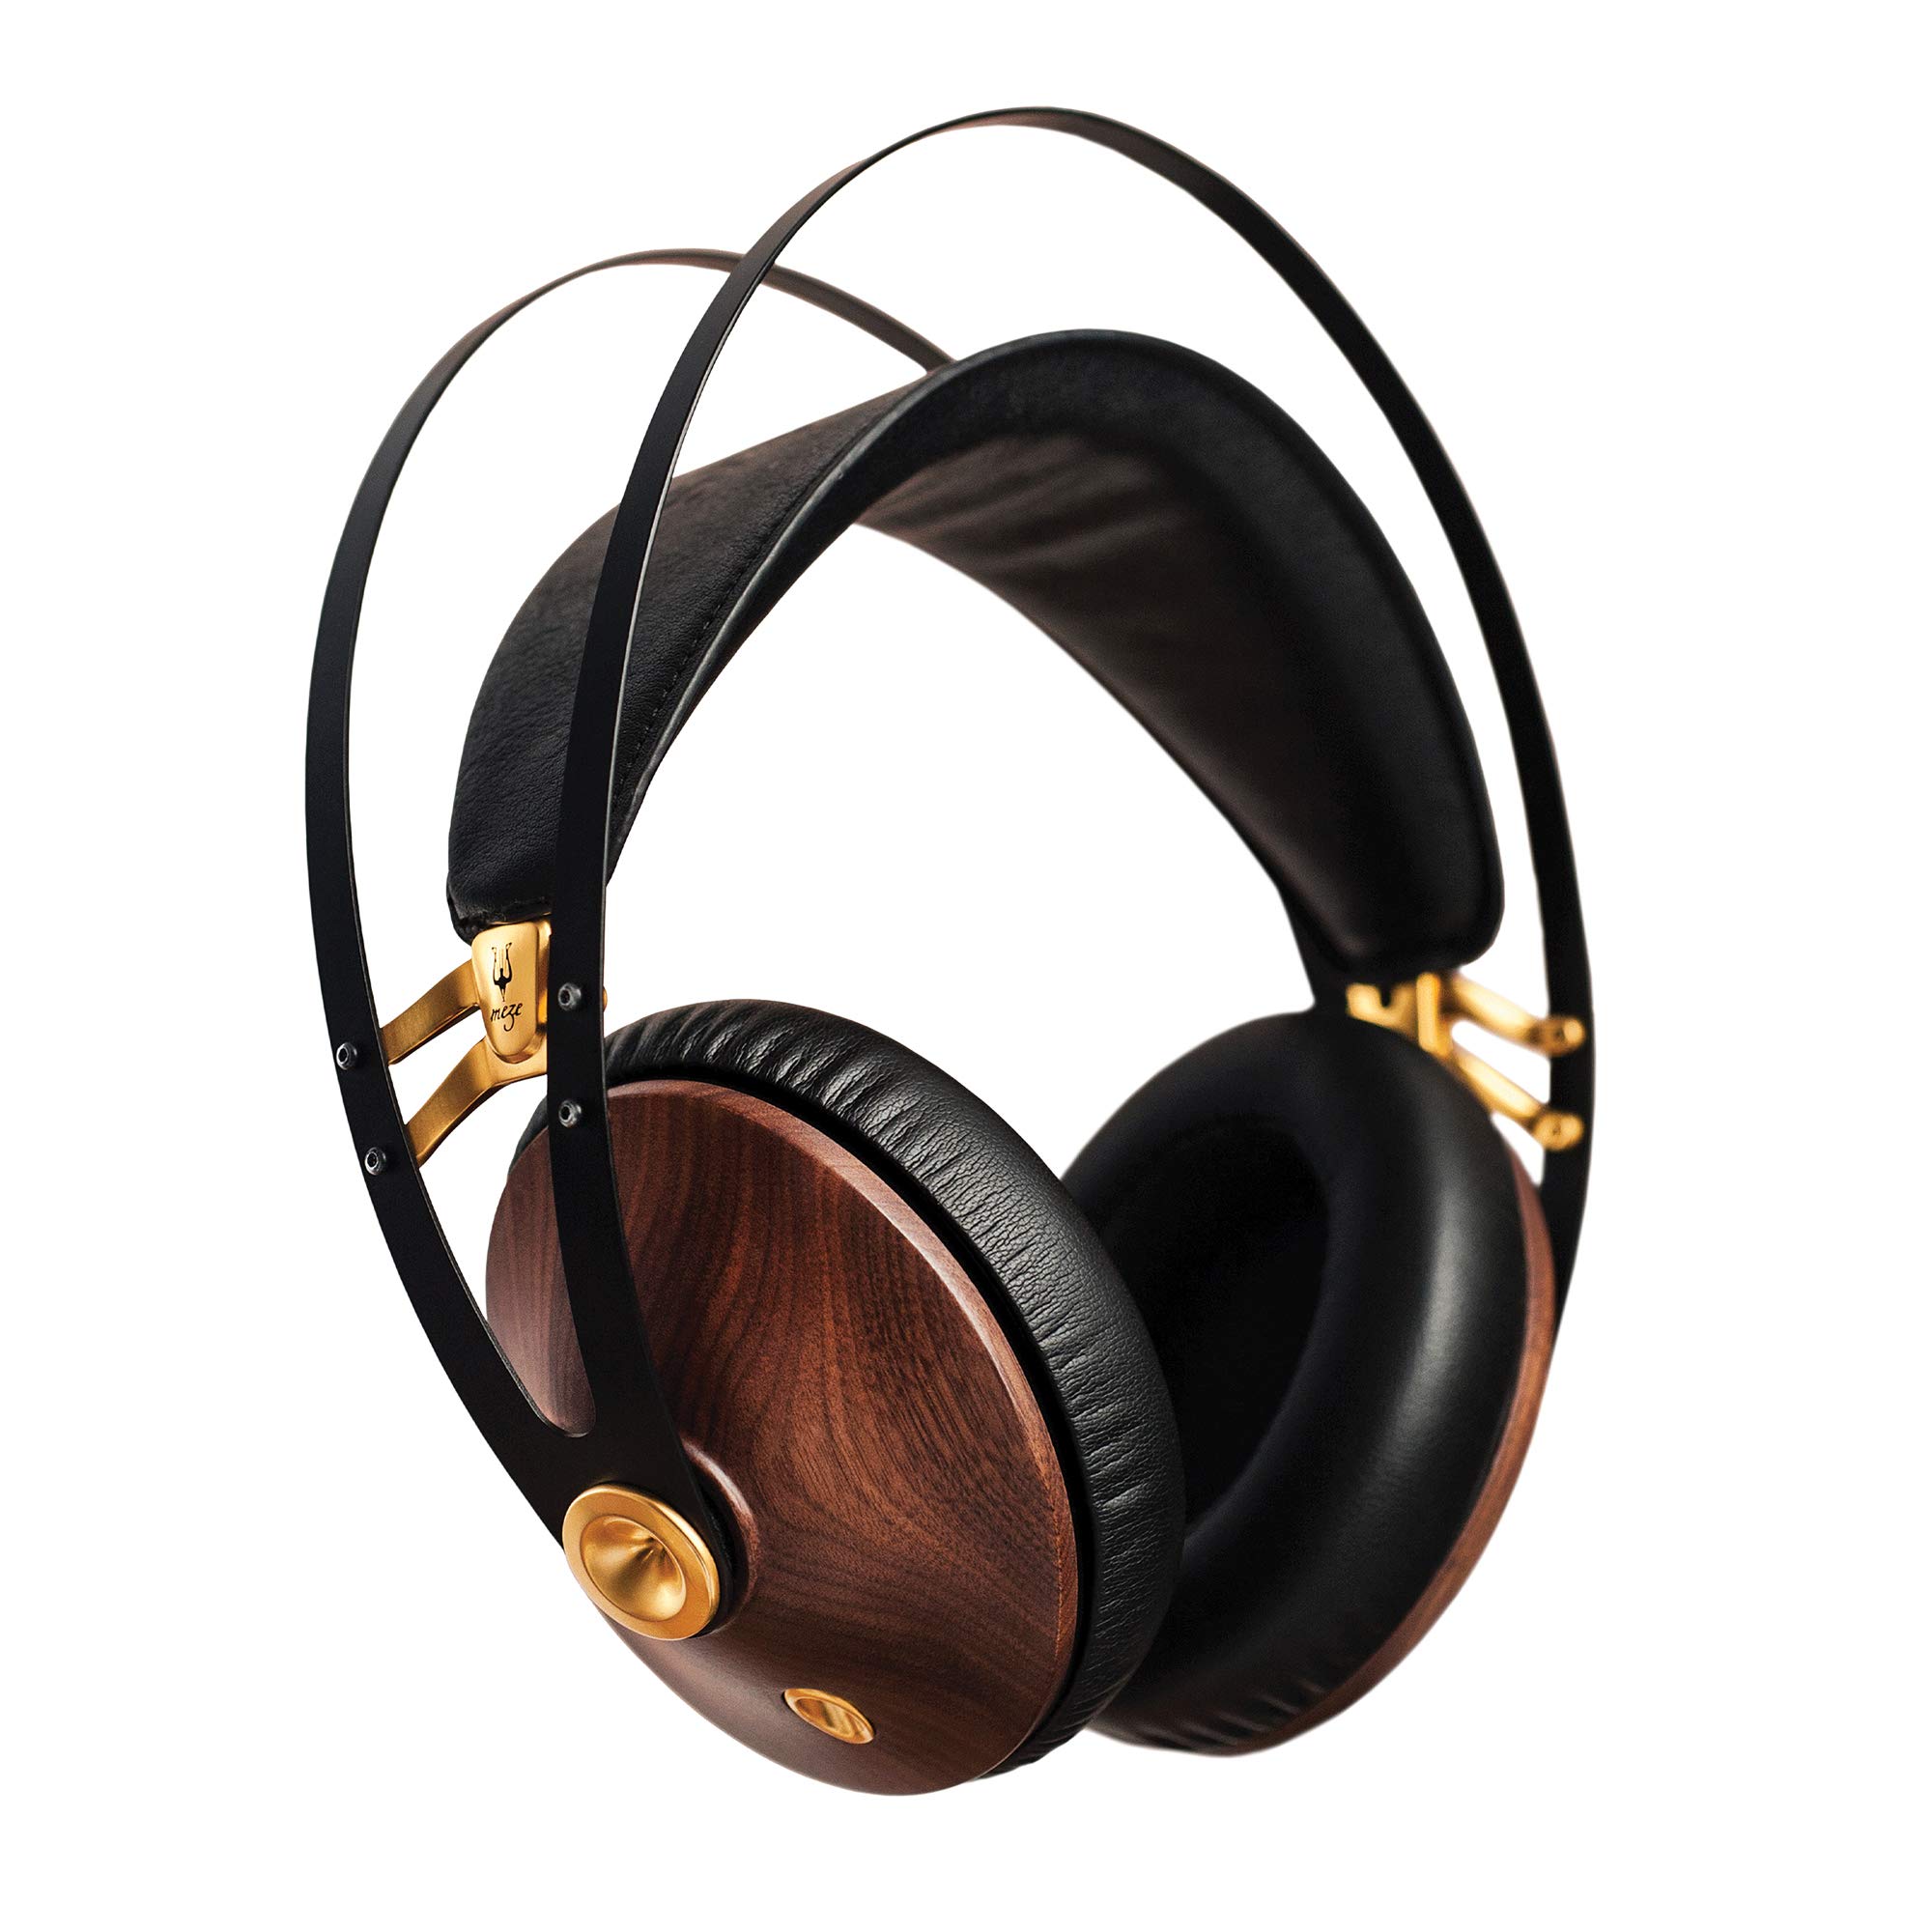 Meze Headphones Meze 99 Classics Walnut Gold | Wired Over-Ear Headphones with Mic and Self Adjustable Headband | Classic Wooden Closed-Back Headset for Audiophiles